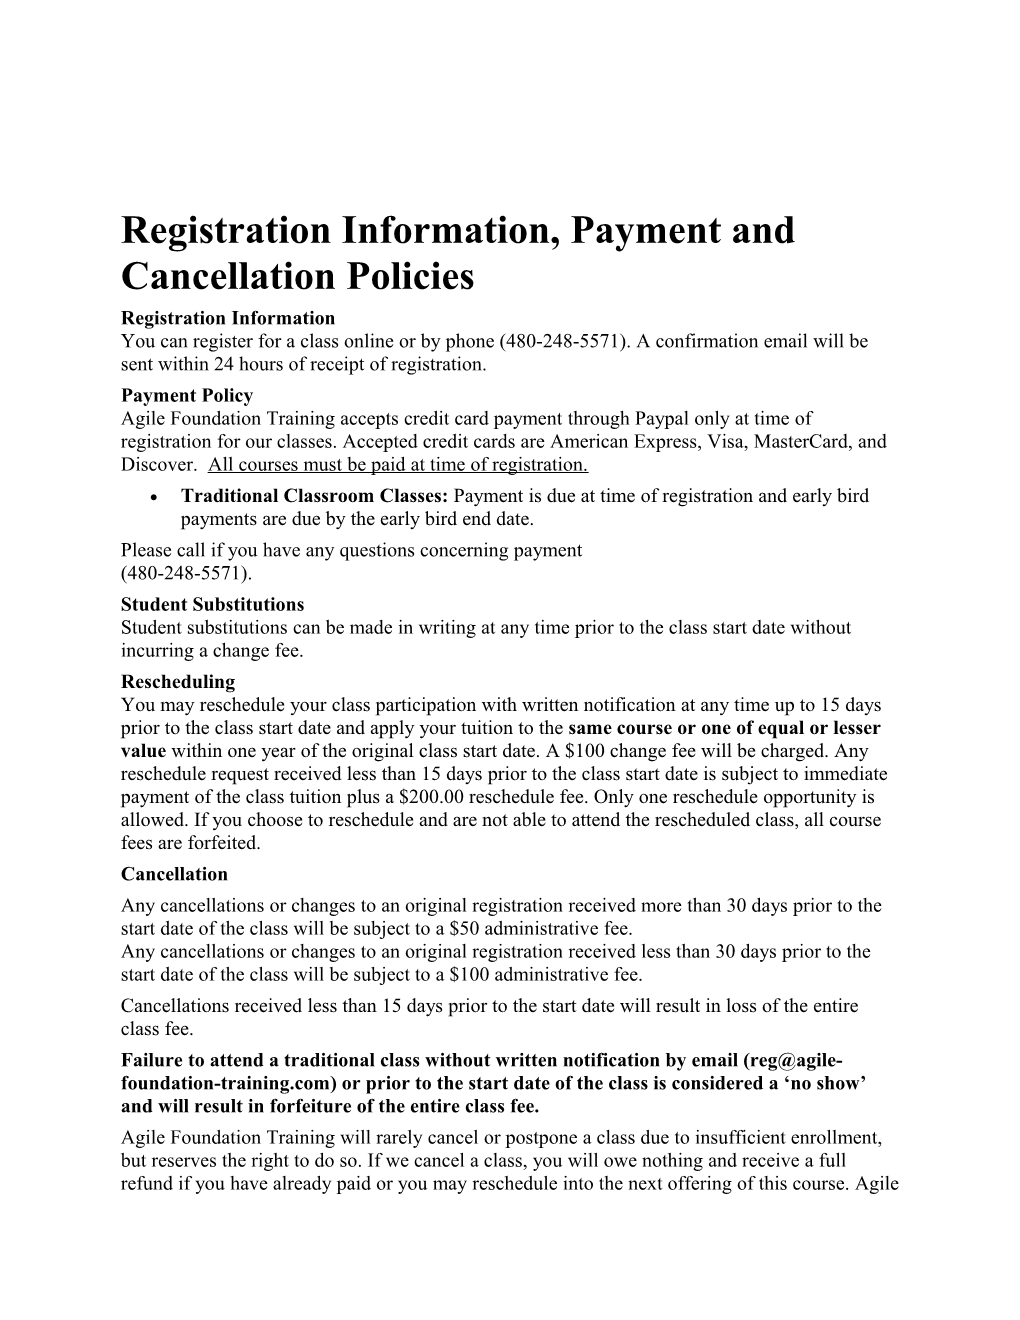 Registration Information, Payment and Cancellation Policies